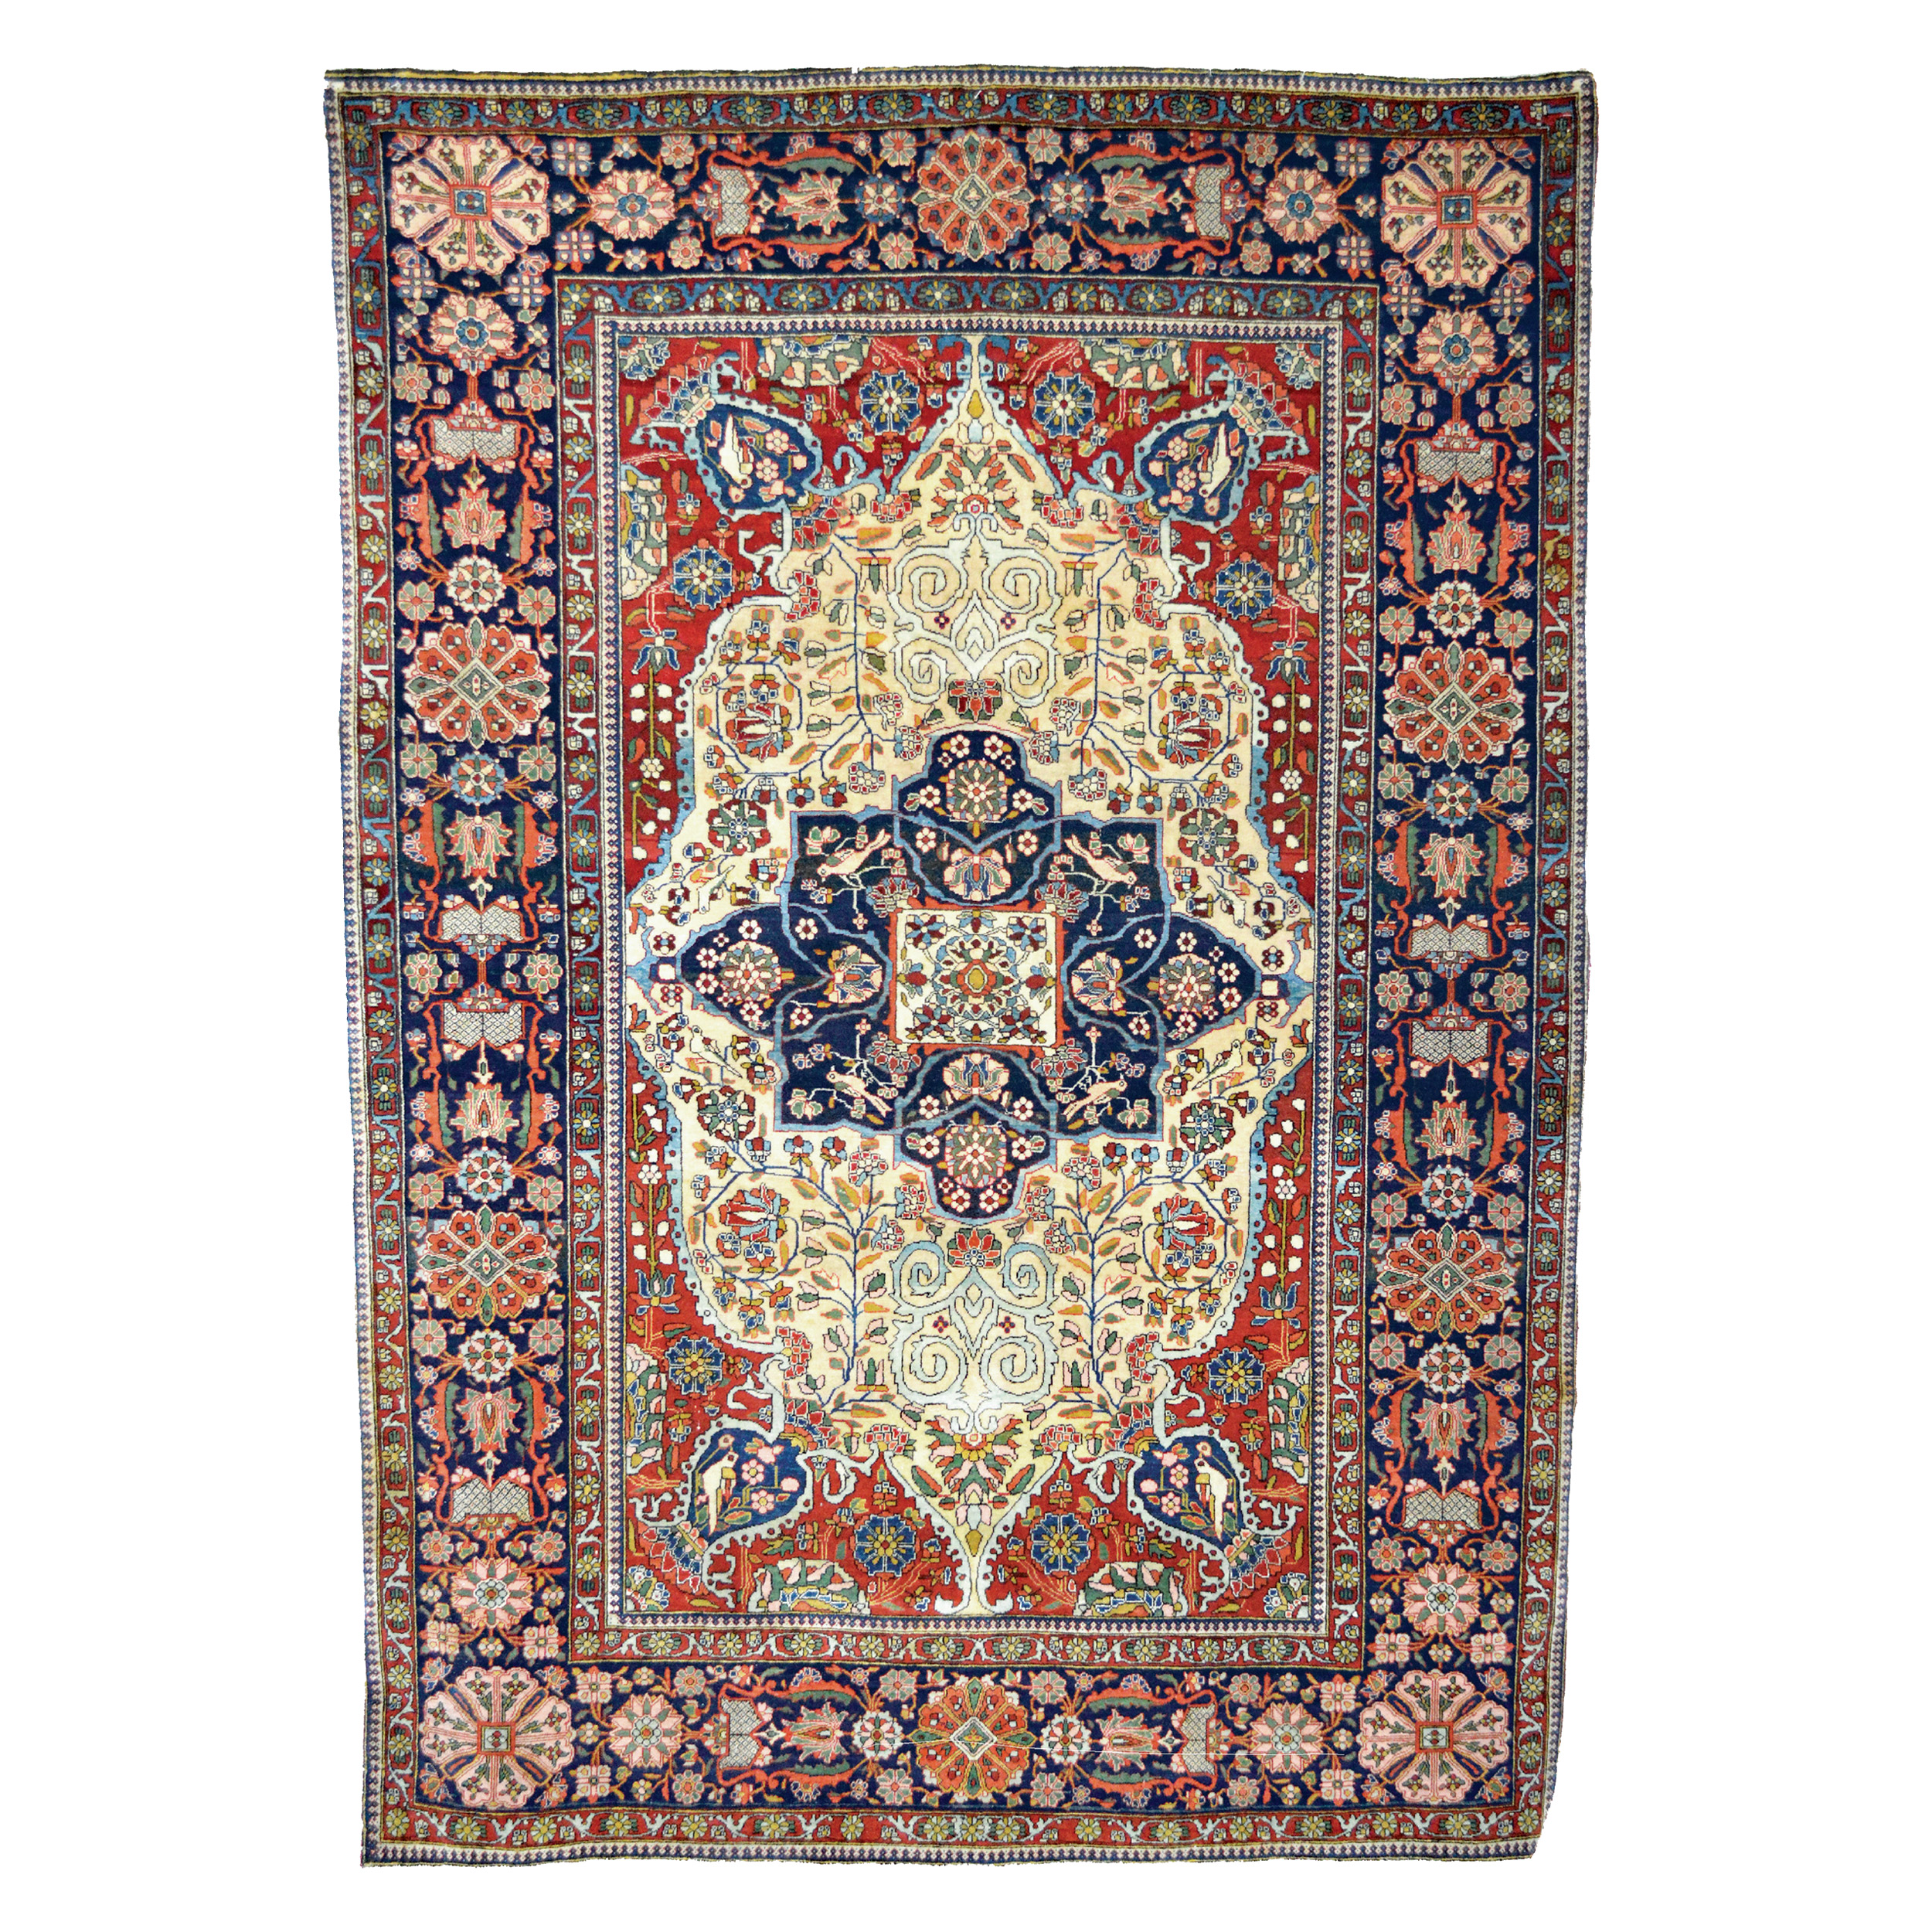 A late 19th century Persian Mohtasham Kashan rug. The ivory field is decorated with a navy blue medallion and stylized floral forms. Brick red corner spandrels contain vases and birds. A navy blue border of grand scale frames the field, central Persia, circa 1895 - Douglas Stock Gallery specializes in antique Persian Mohtasham Kashan rugs.